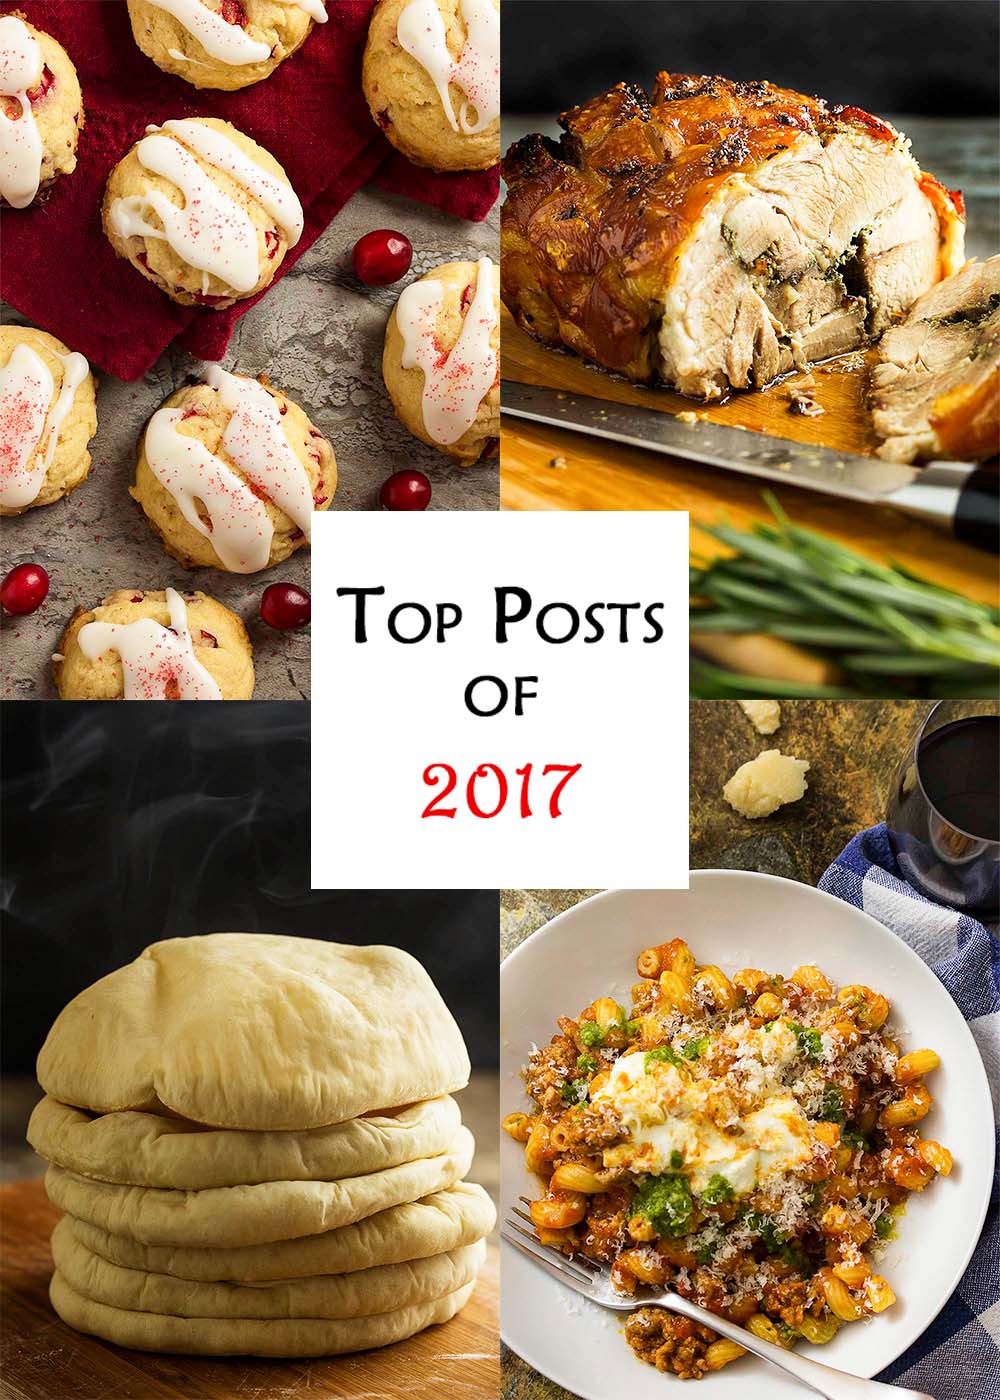 Here are my top recipes of 2017! If you are looking for great Italian, Spanish, Greek, and French recipes (and American!), you can't go wrong with these favorites. From a slow braised ragu, to chicken dijon, homemade breads, and great cookies. And I included my personal favorites from the year which didn't make the top 10 in popularity. | justalittlebitofbacon.com #mediterraneanfood #italianfood #greekfood #christmascookies #comfortfood